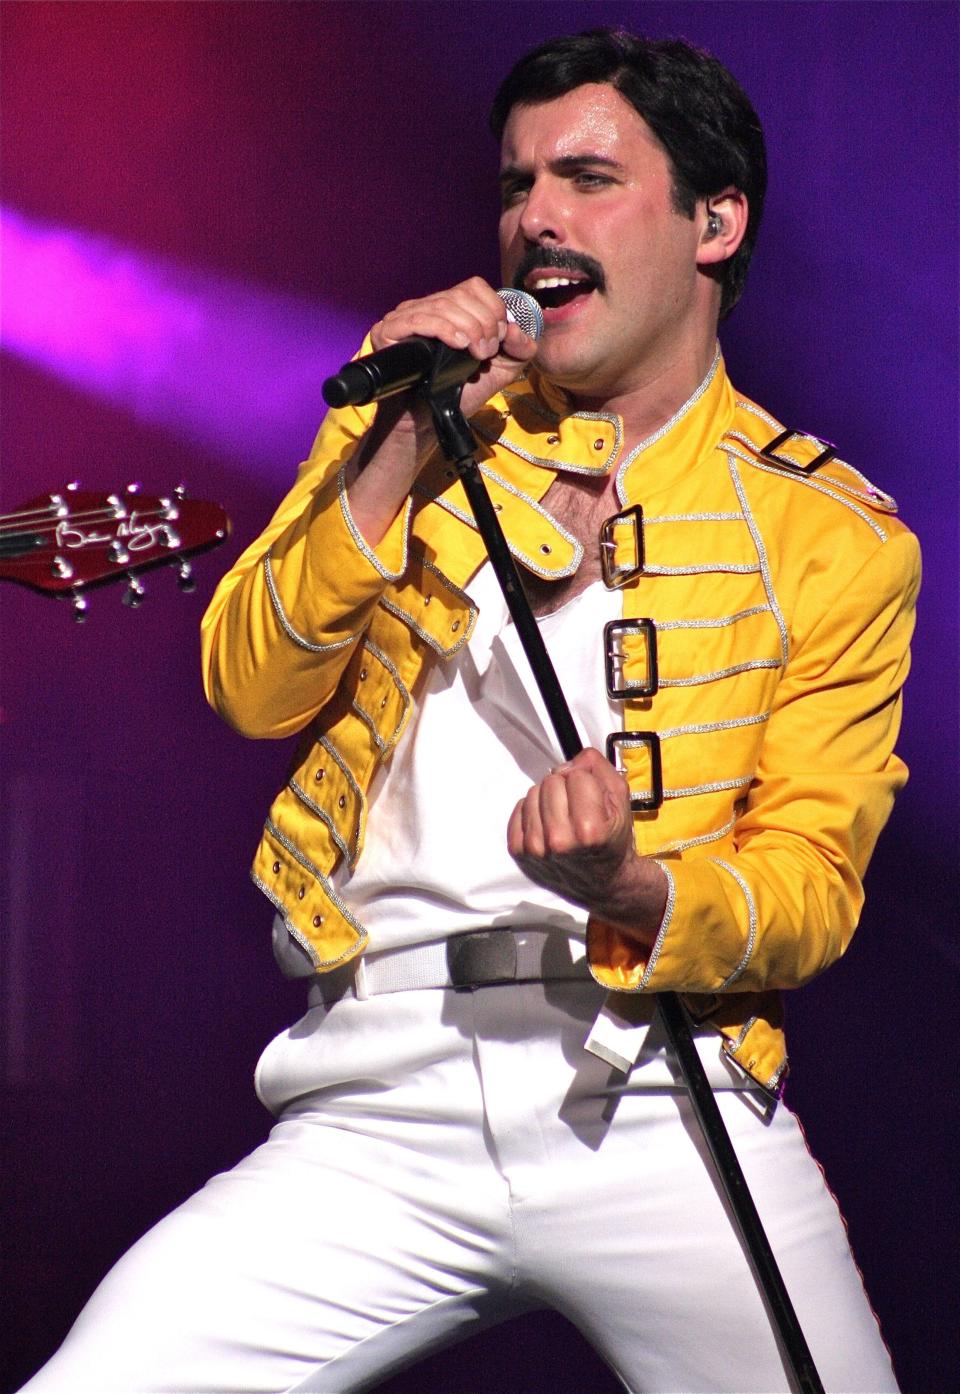 Patrick Myers started singing Queen songs as Freddie Mercury in his youth and 30 years later is still leading the tribute band Killer Queen.